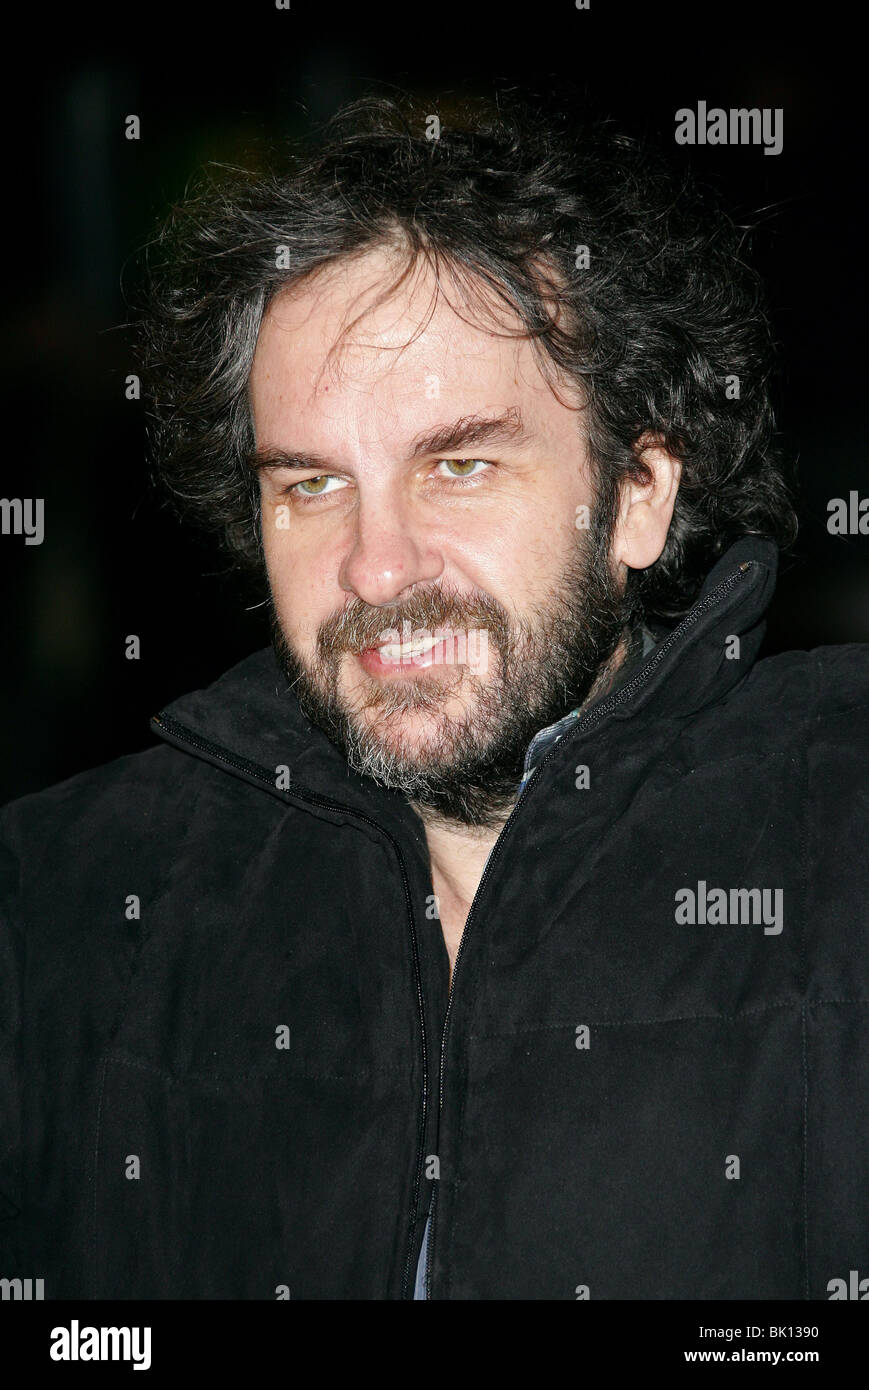 PETER JACKSON KING KONG FILM PREMIER Odeon Leicester Square Londra Inghilterra 08 Dicembre 2005 Foto Stock